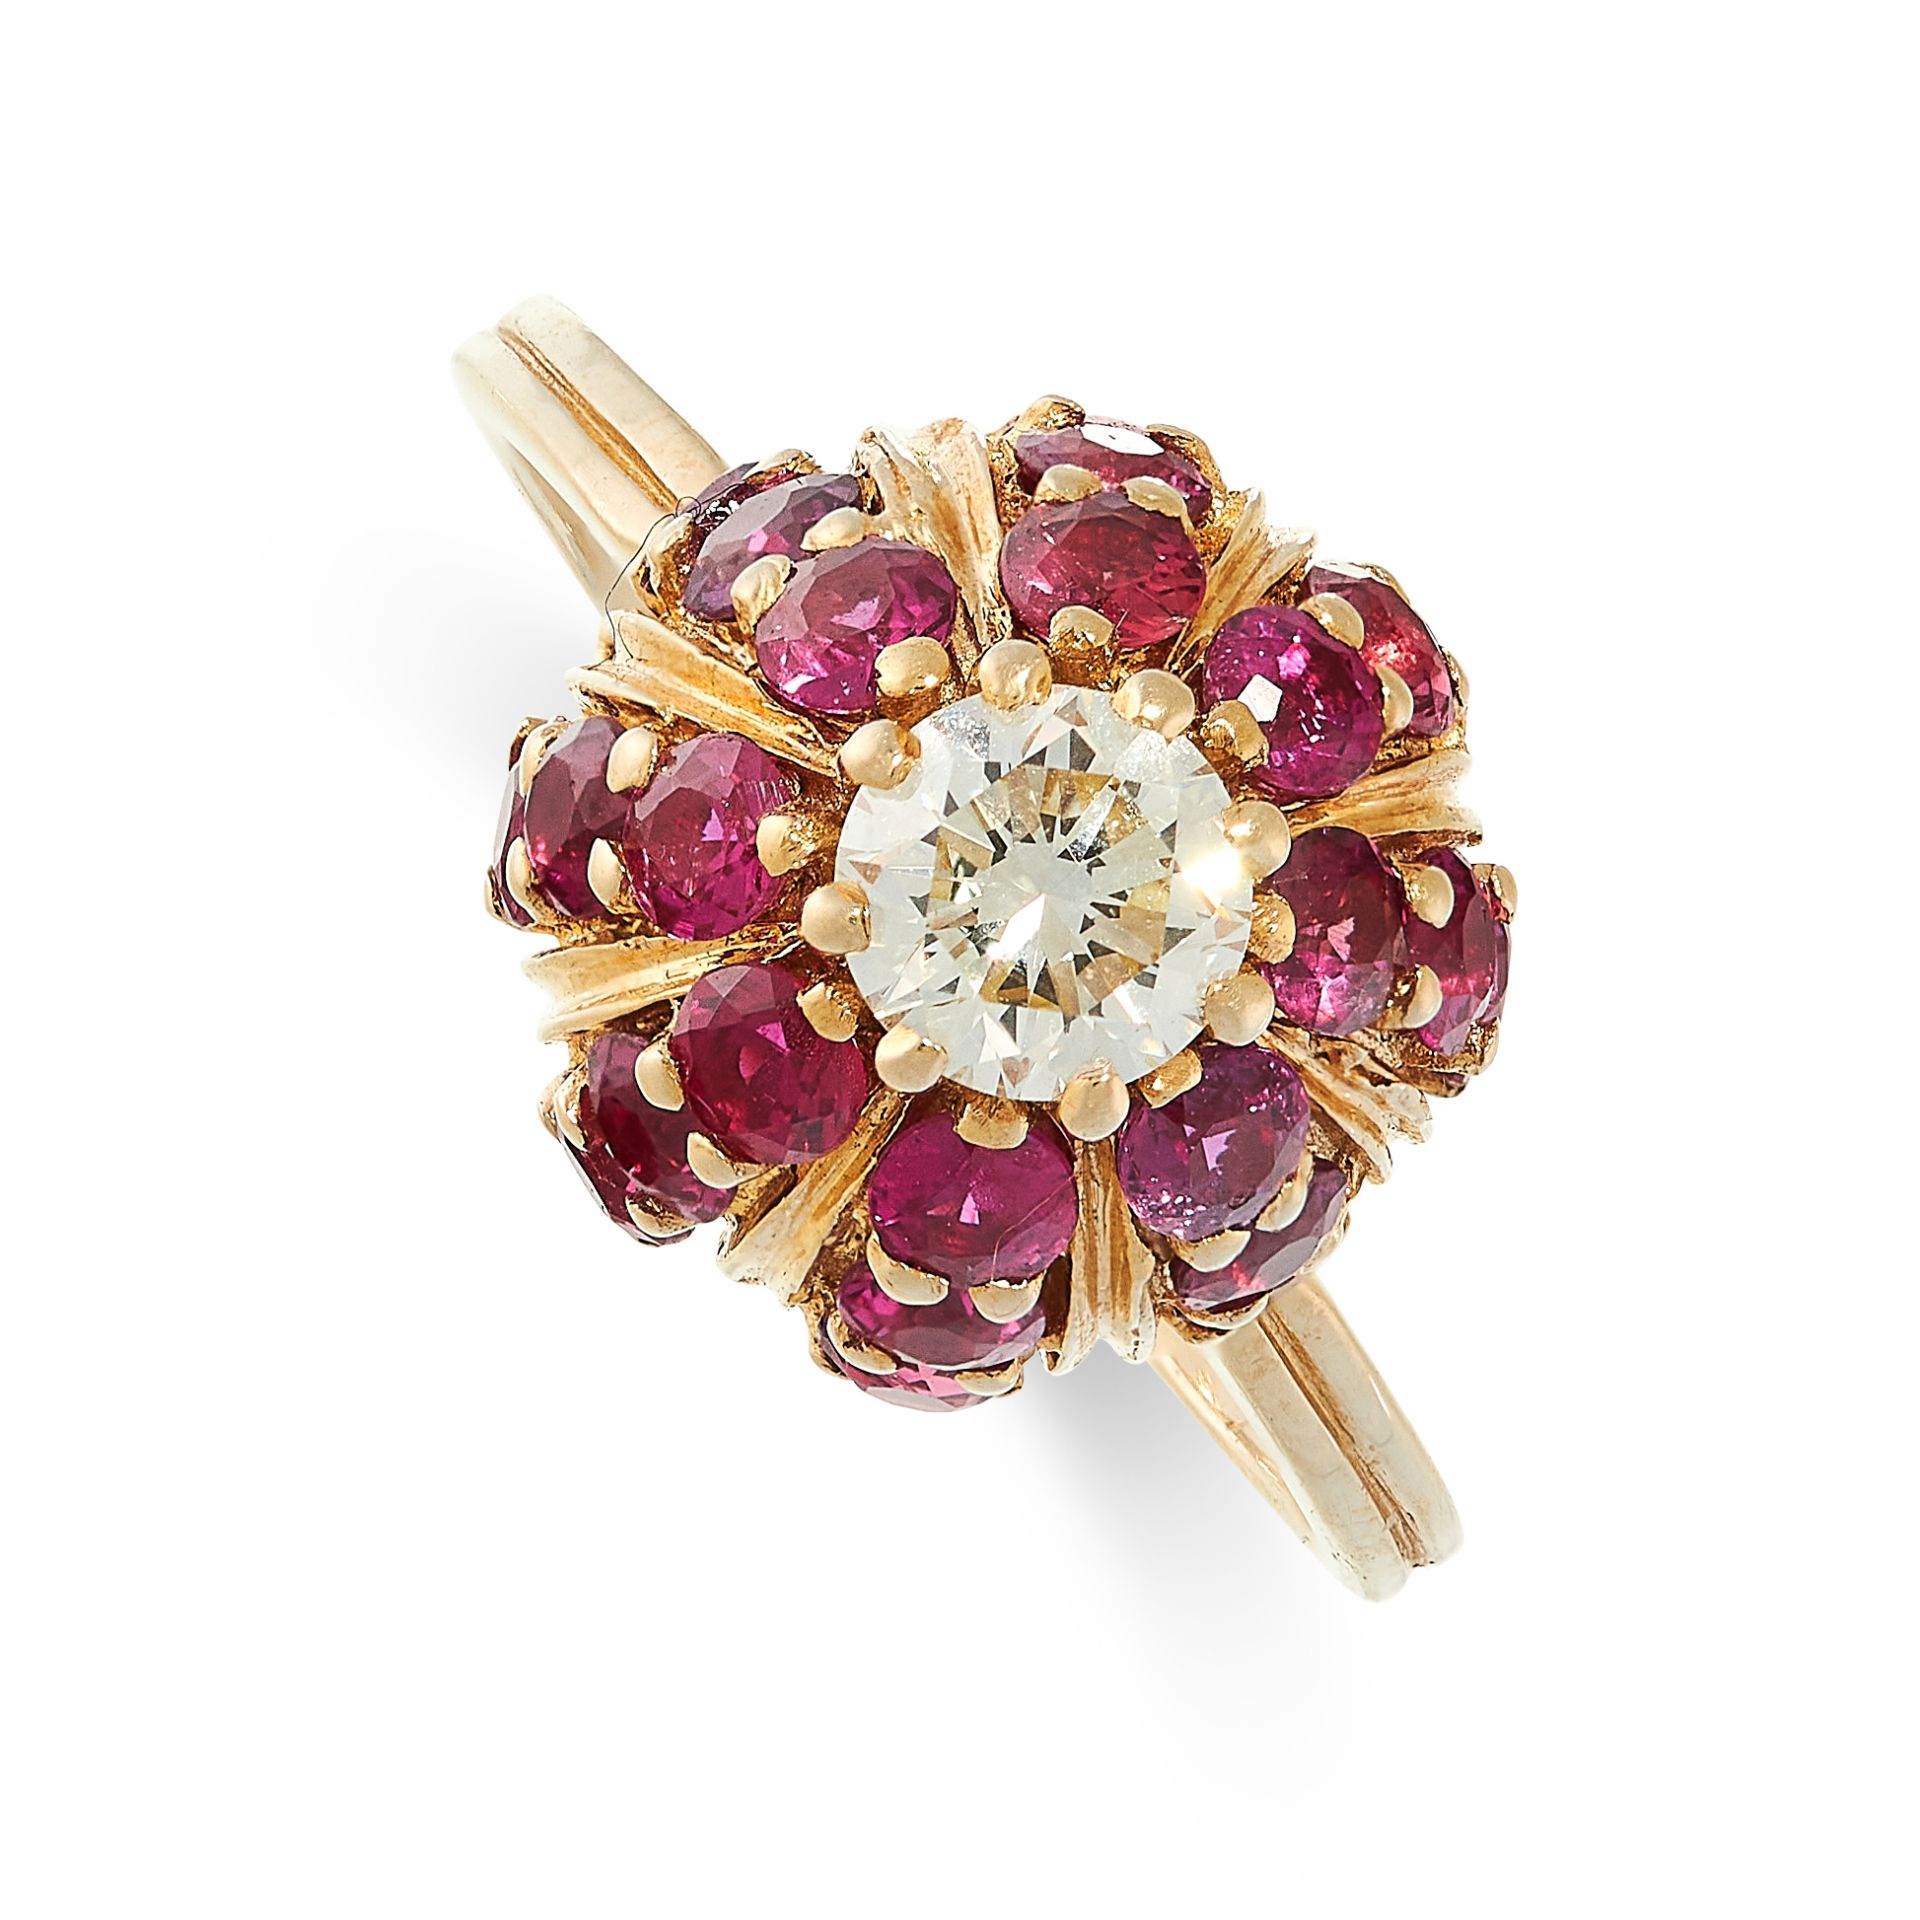 RUBY AND DIAMOND RING of domed design, set with circular-cut rubies and a brilliant-cut diamonds